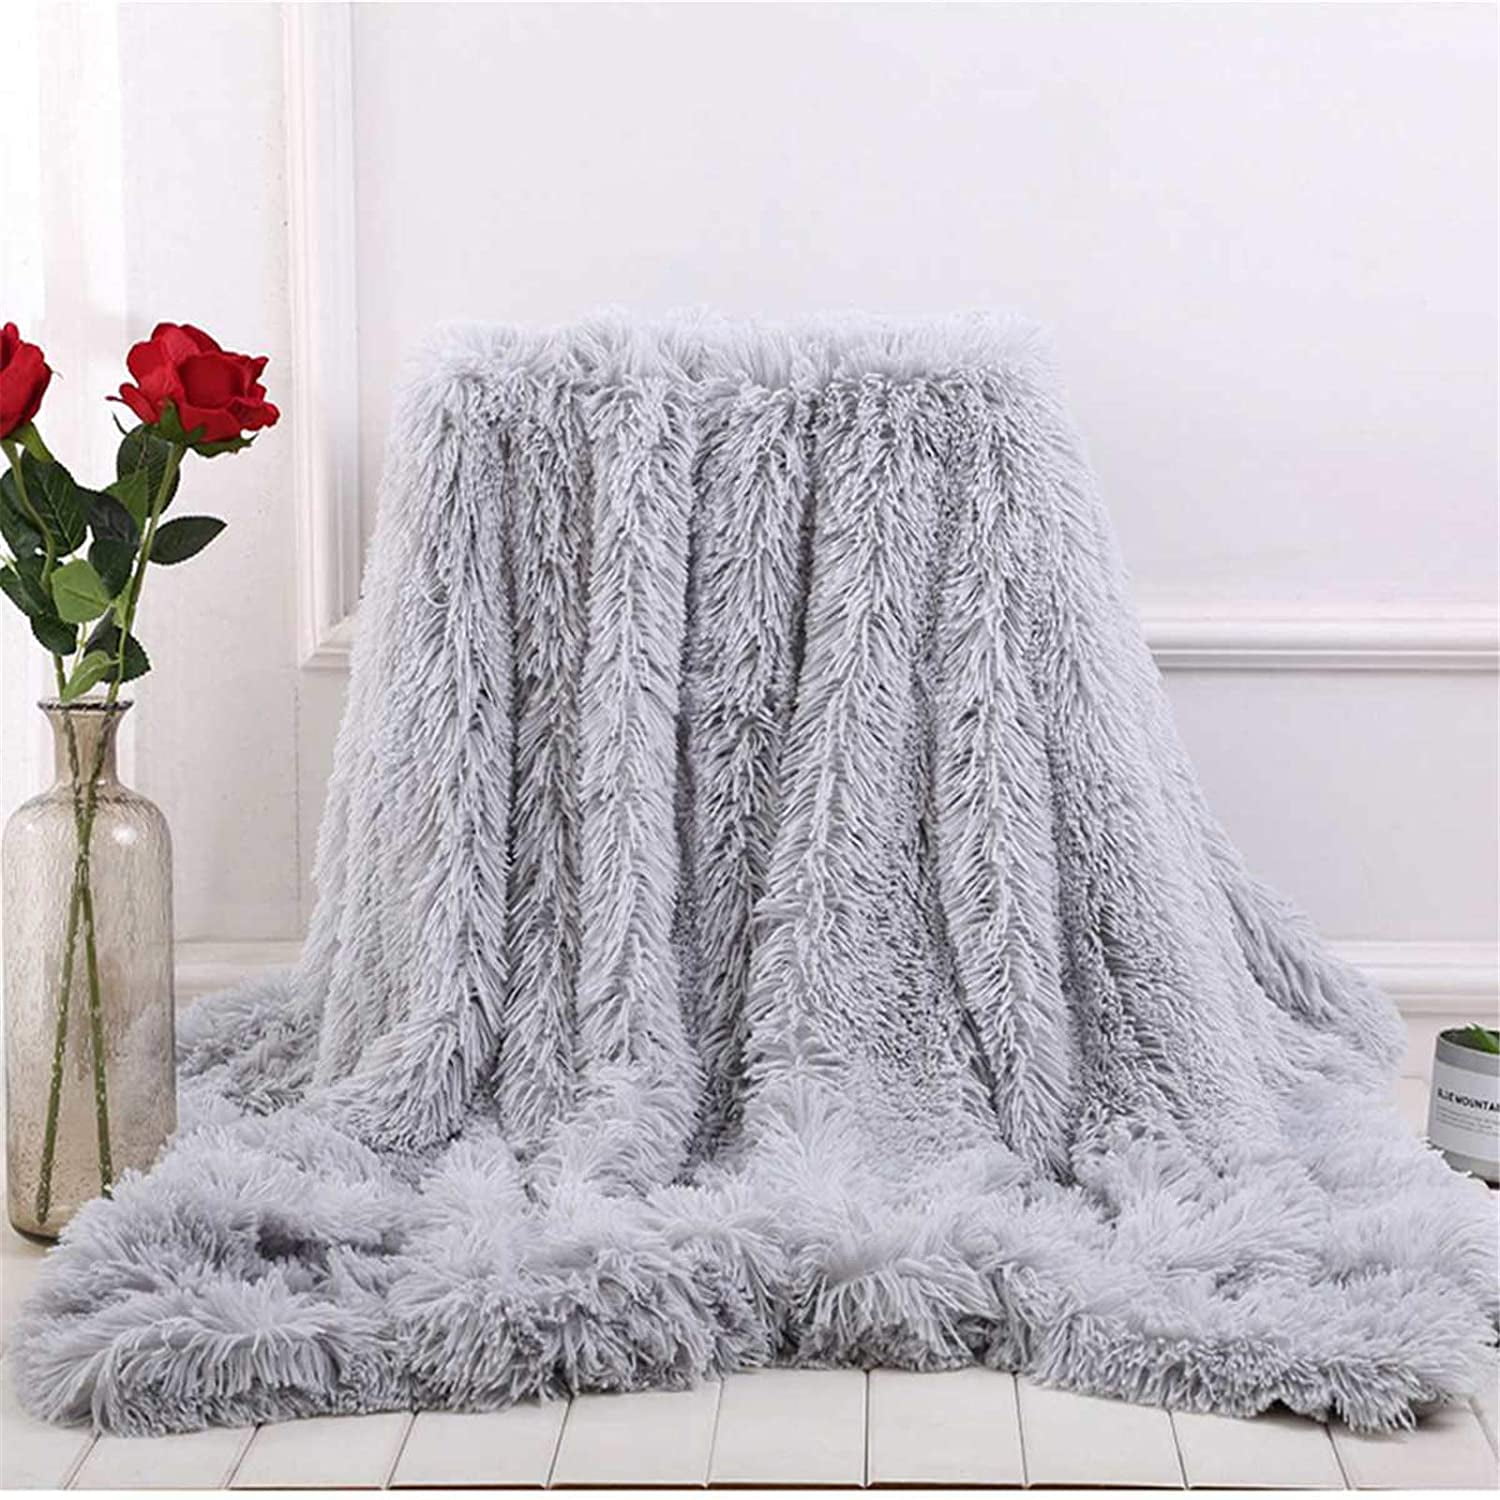 Fur Throw Blanket Super Soft Fluffy Throws Premium Sherpa Backing Blanket  Decorative for Bed, Sofa 